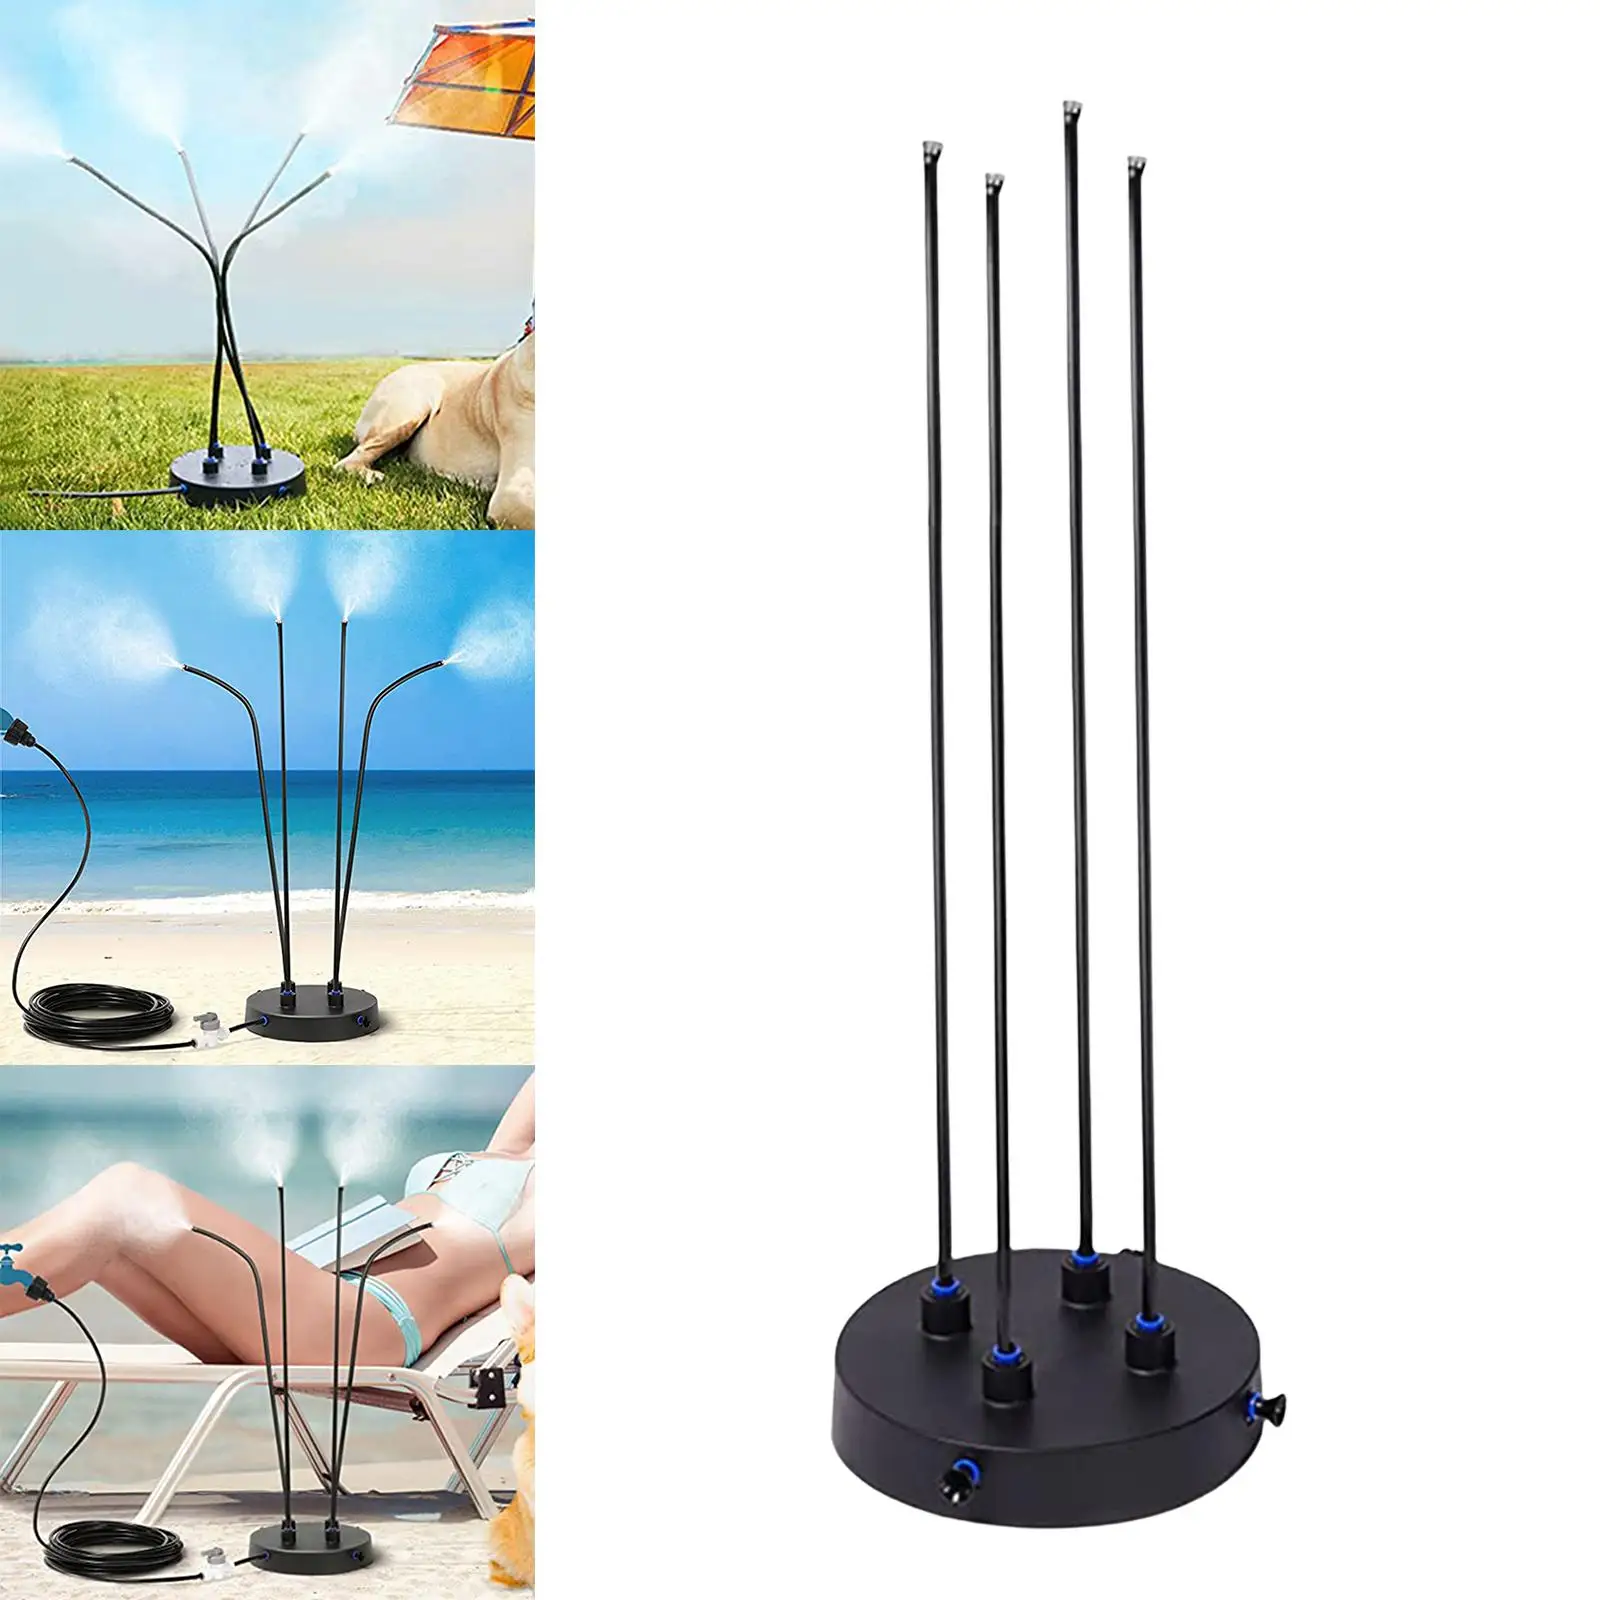 Adjustable Stand up Misting Cooling System Stand Mister Sprayer Flexible Mister for Patio Greenhouse Lawn Backyard Tools